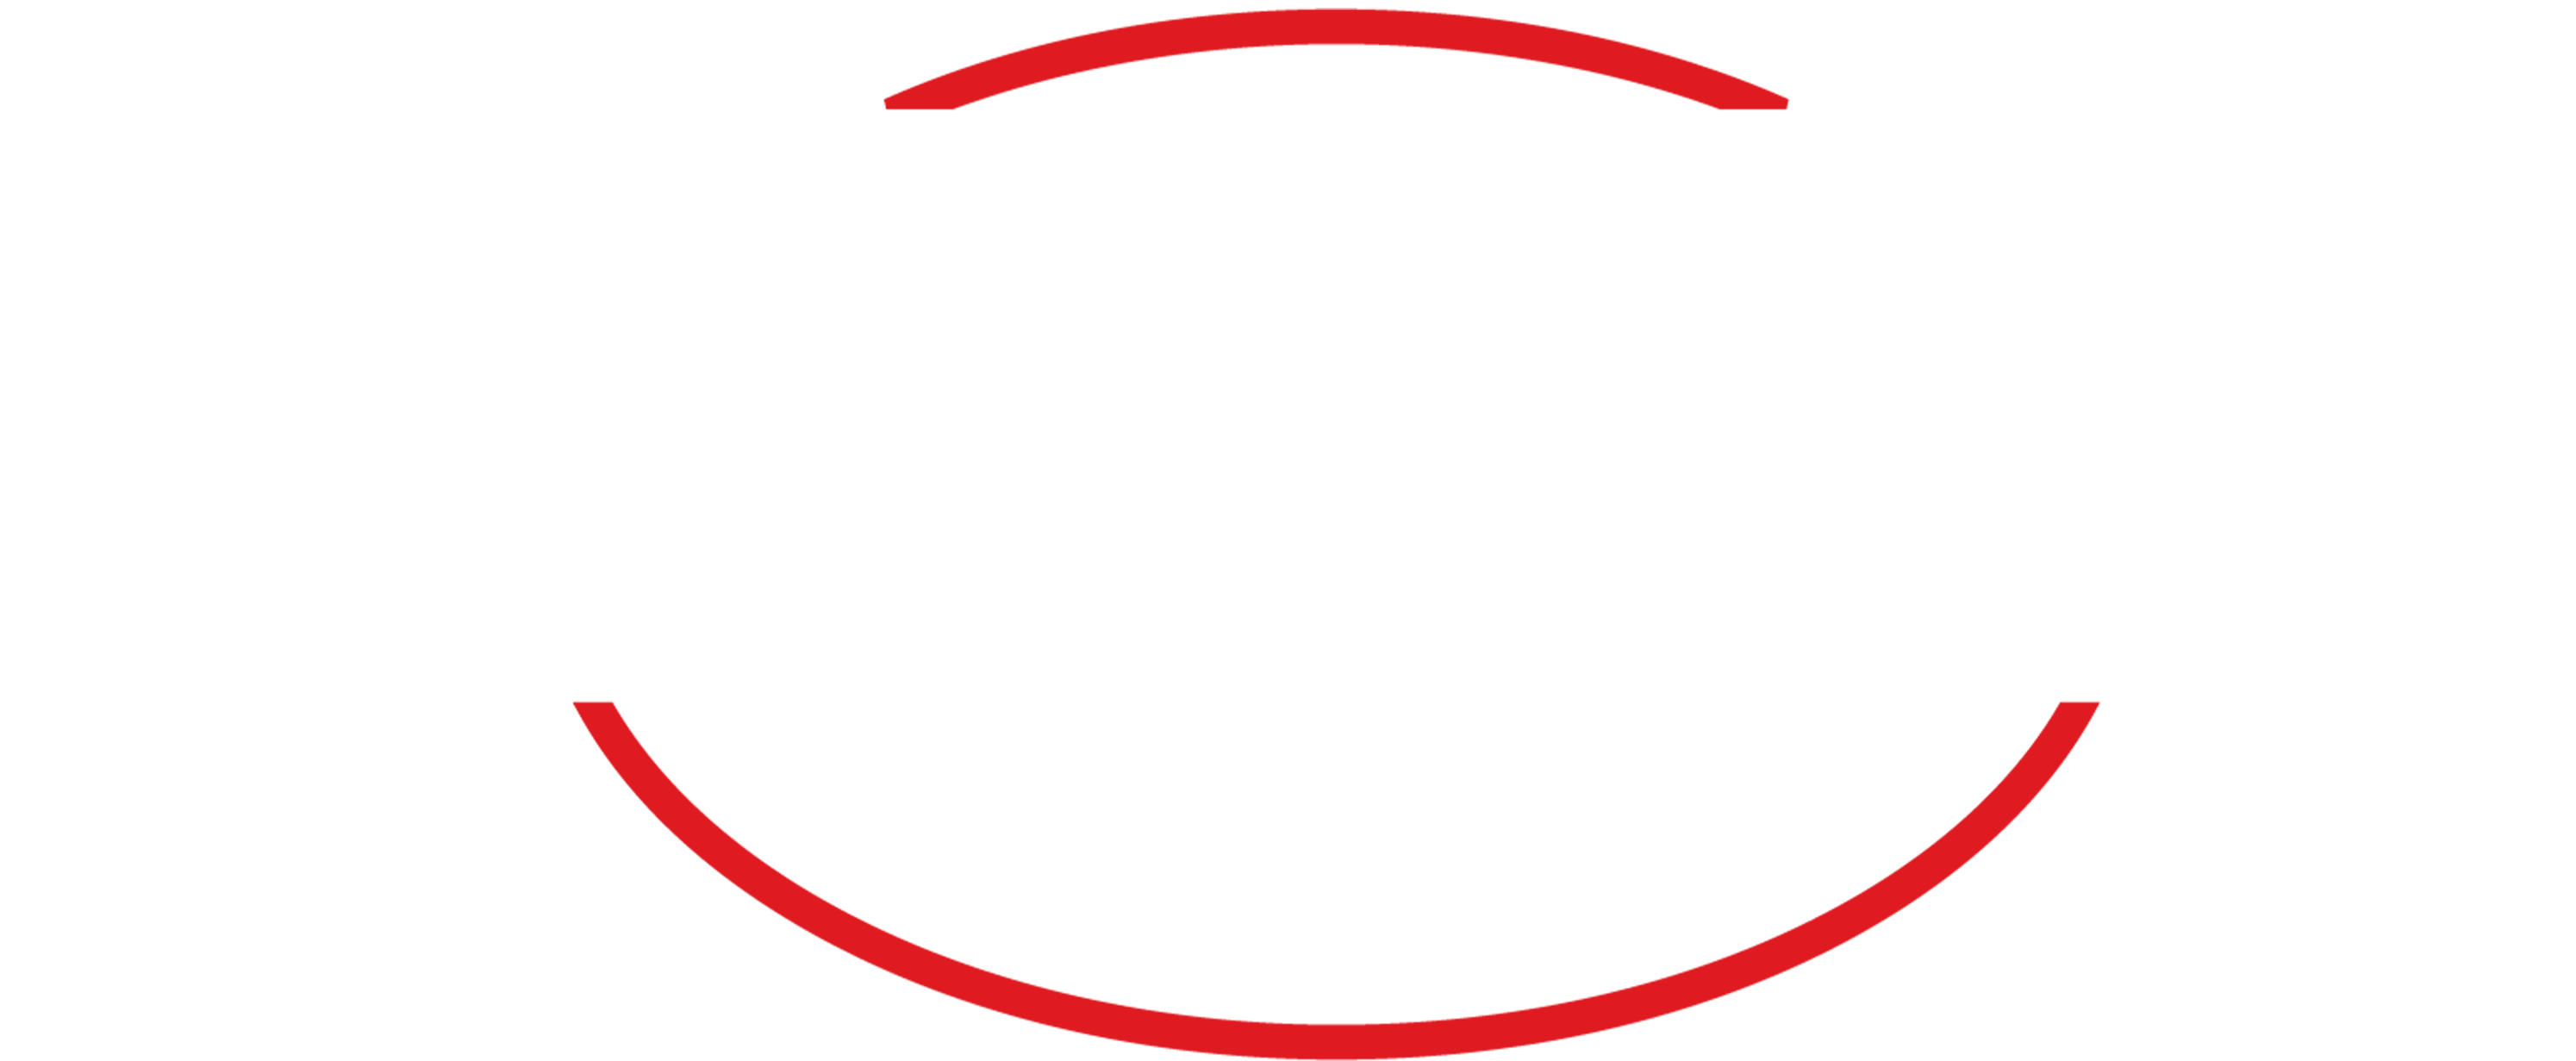 Polaris® Can-Am Honda World proudly serves Mesquite, AZ and our neighbors in Las Vegas, Mesquite, St. George